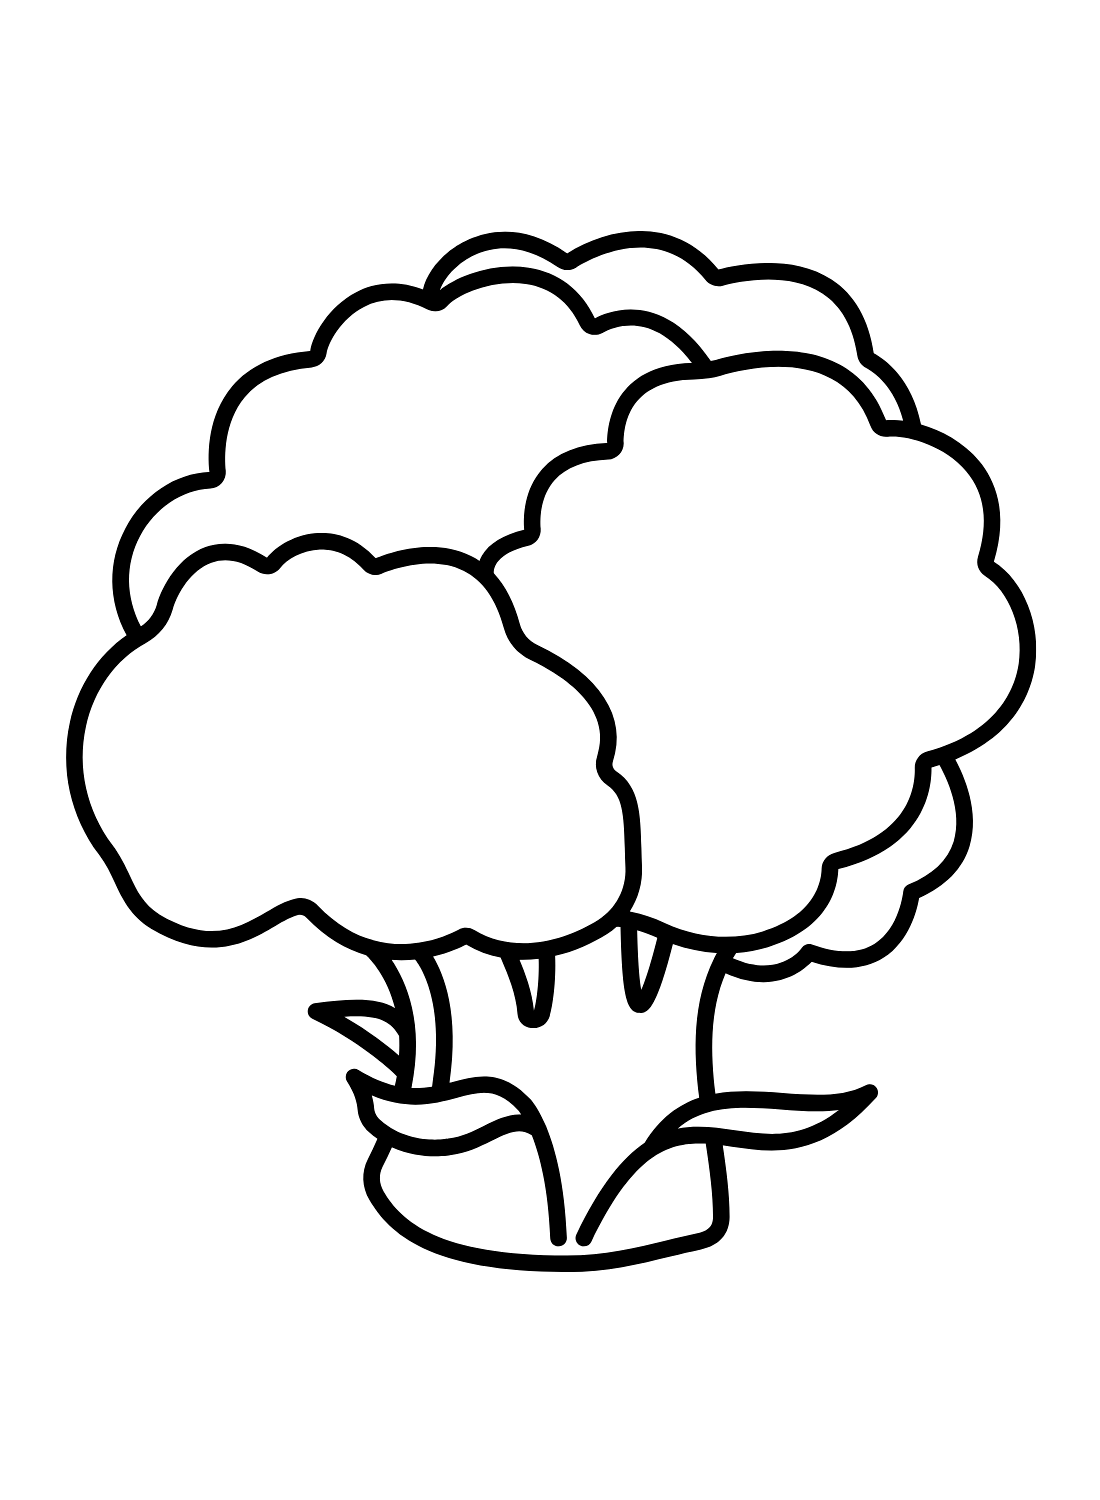 Broccoli Images from Broccoli